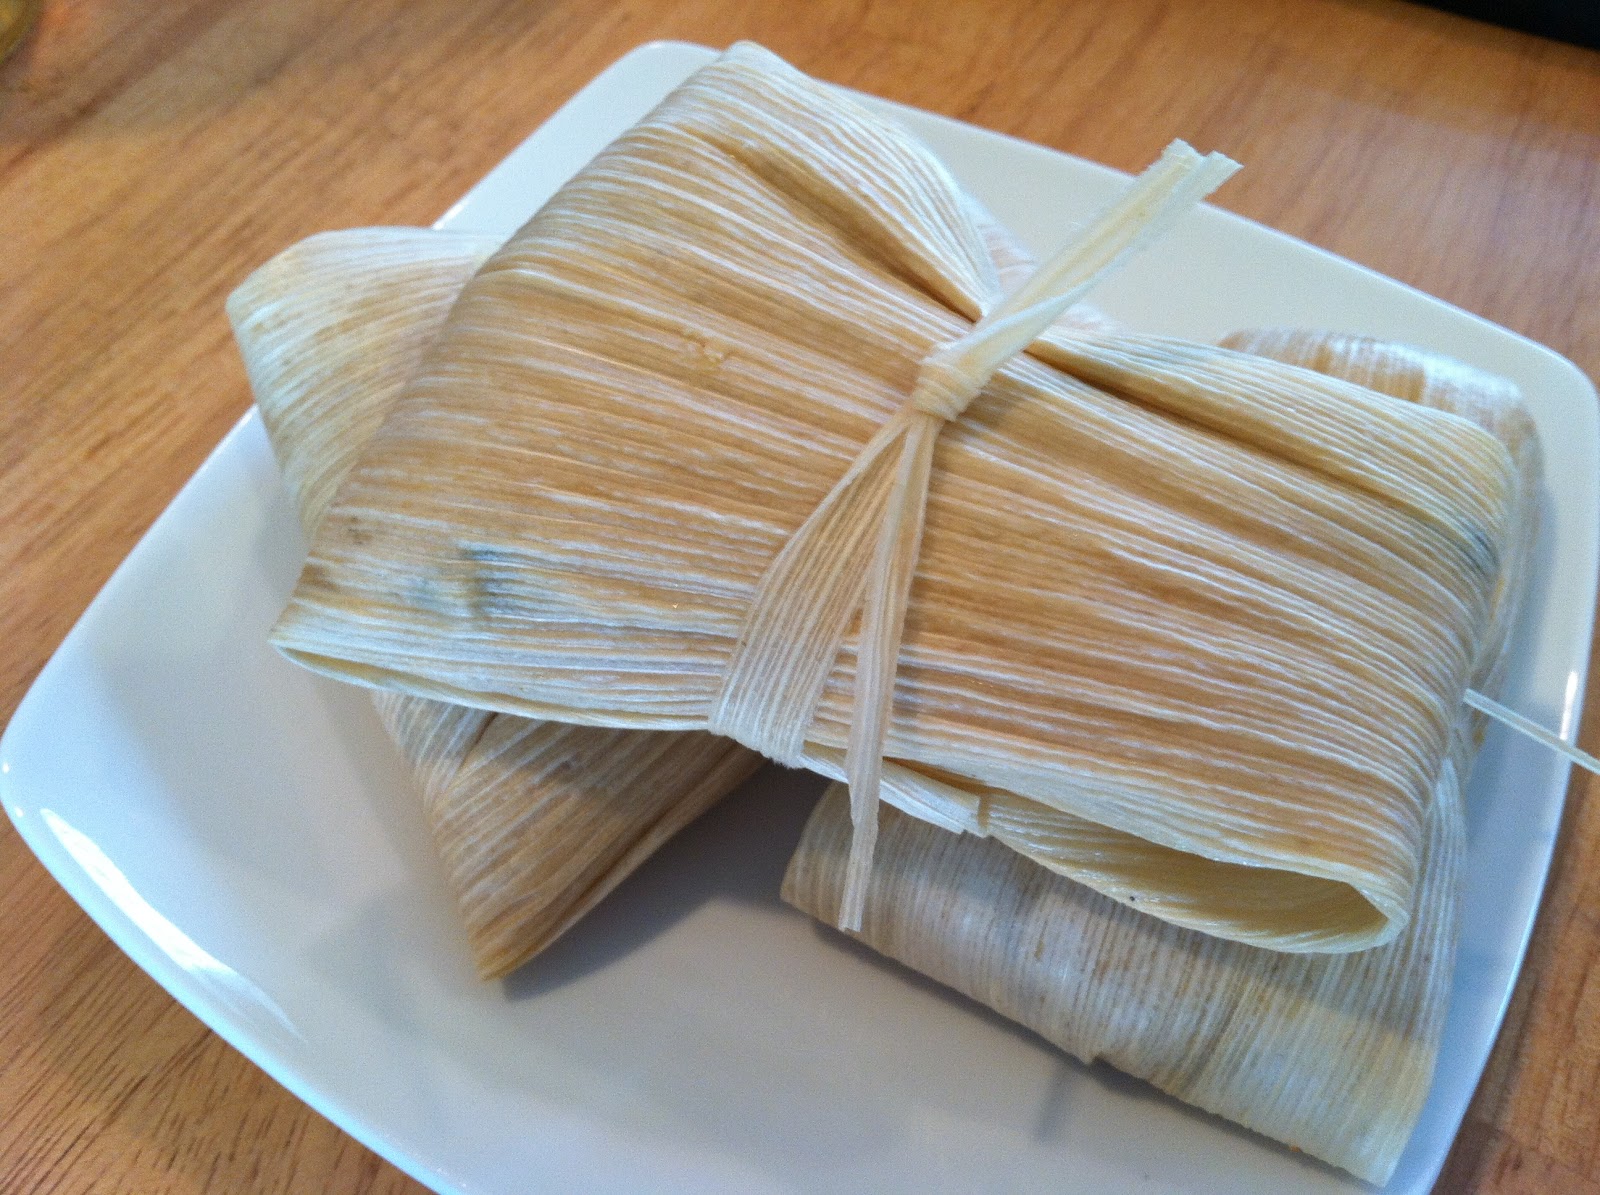 Some Sugar Added: Tamales!